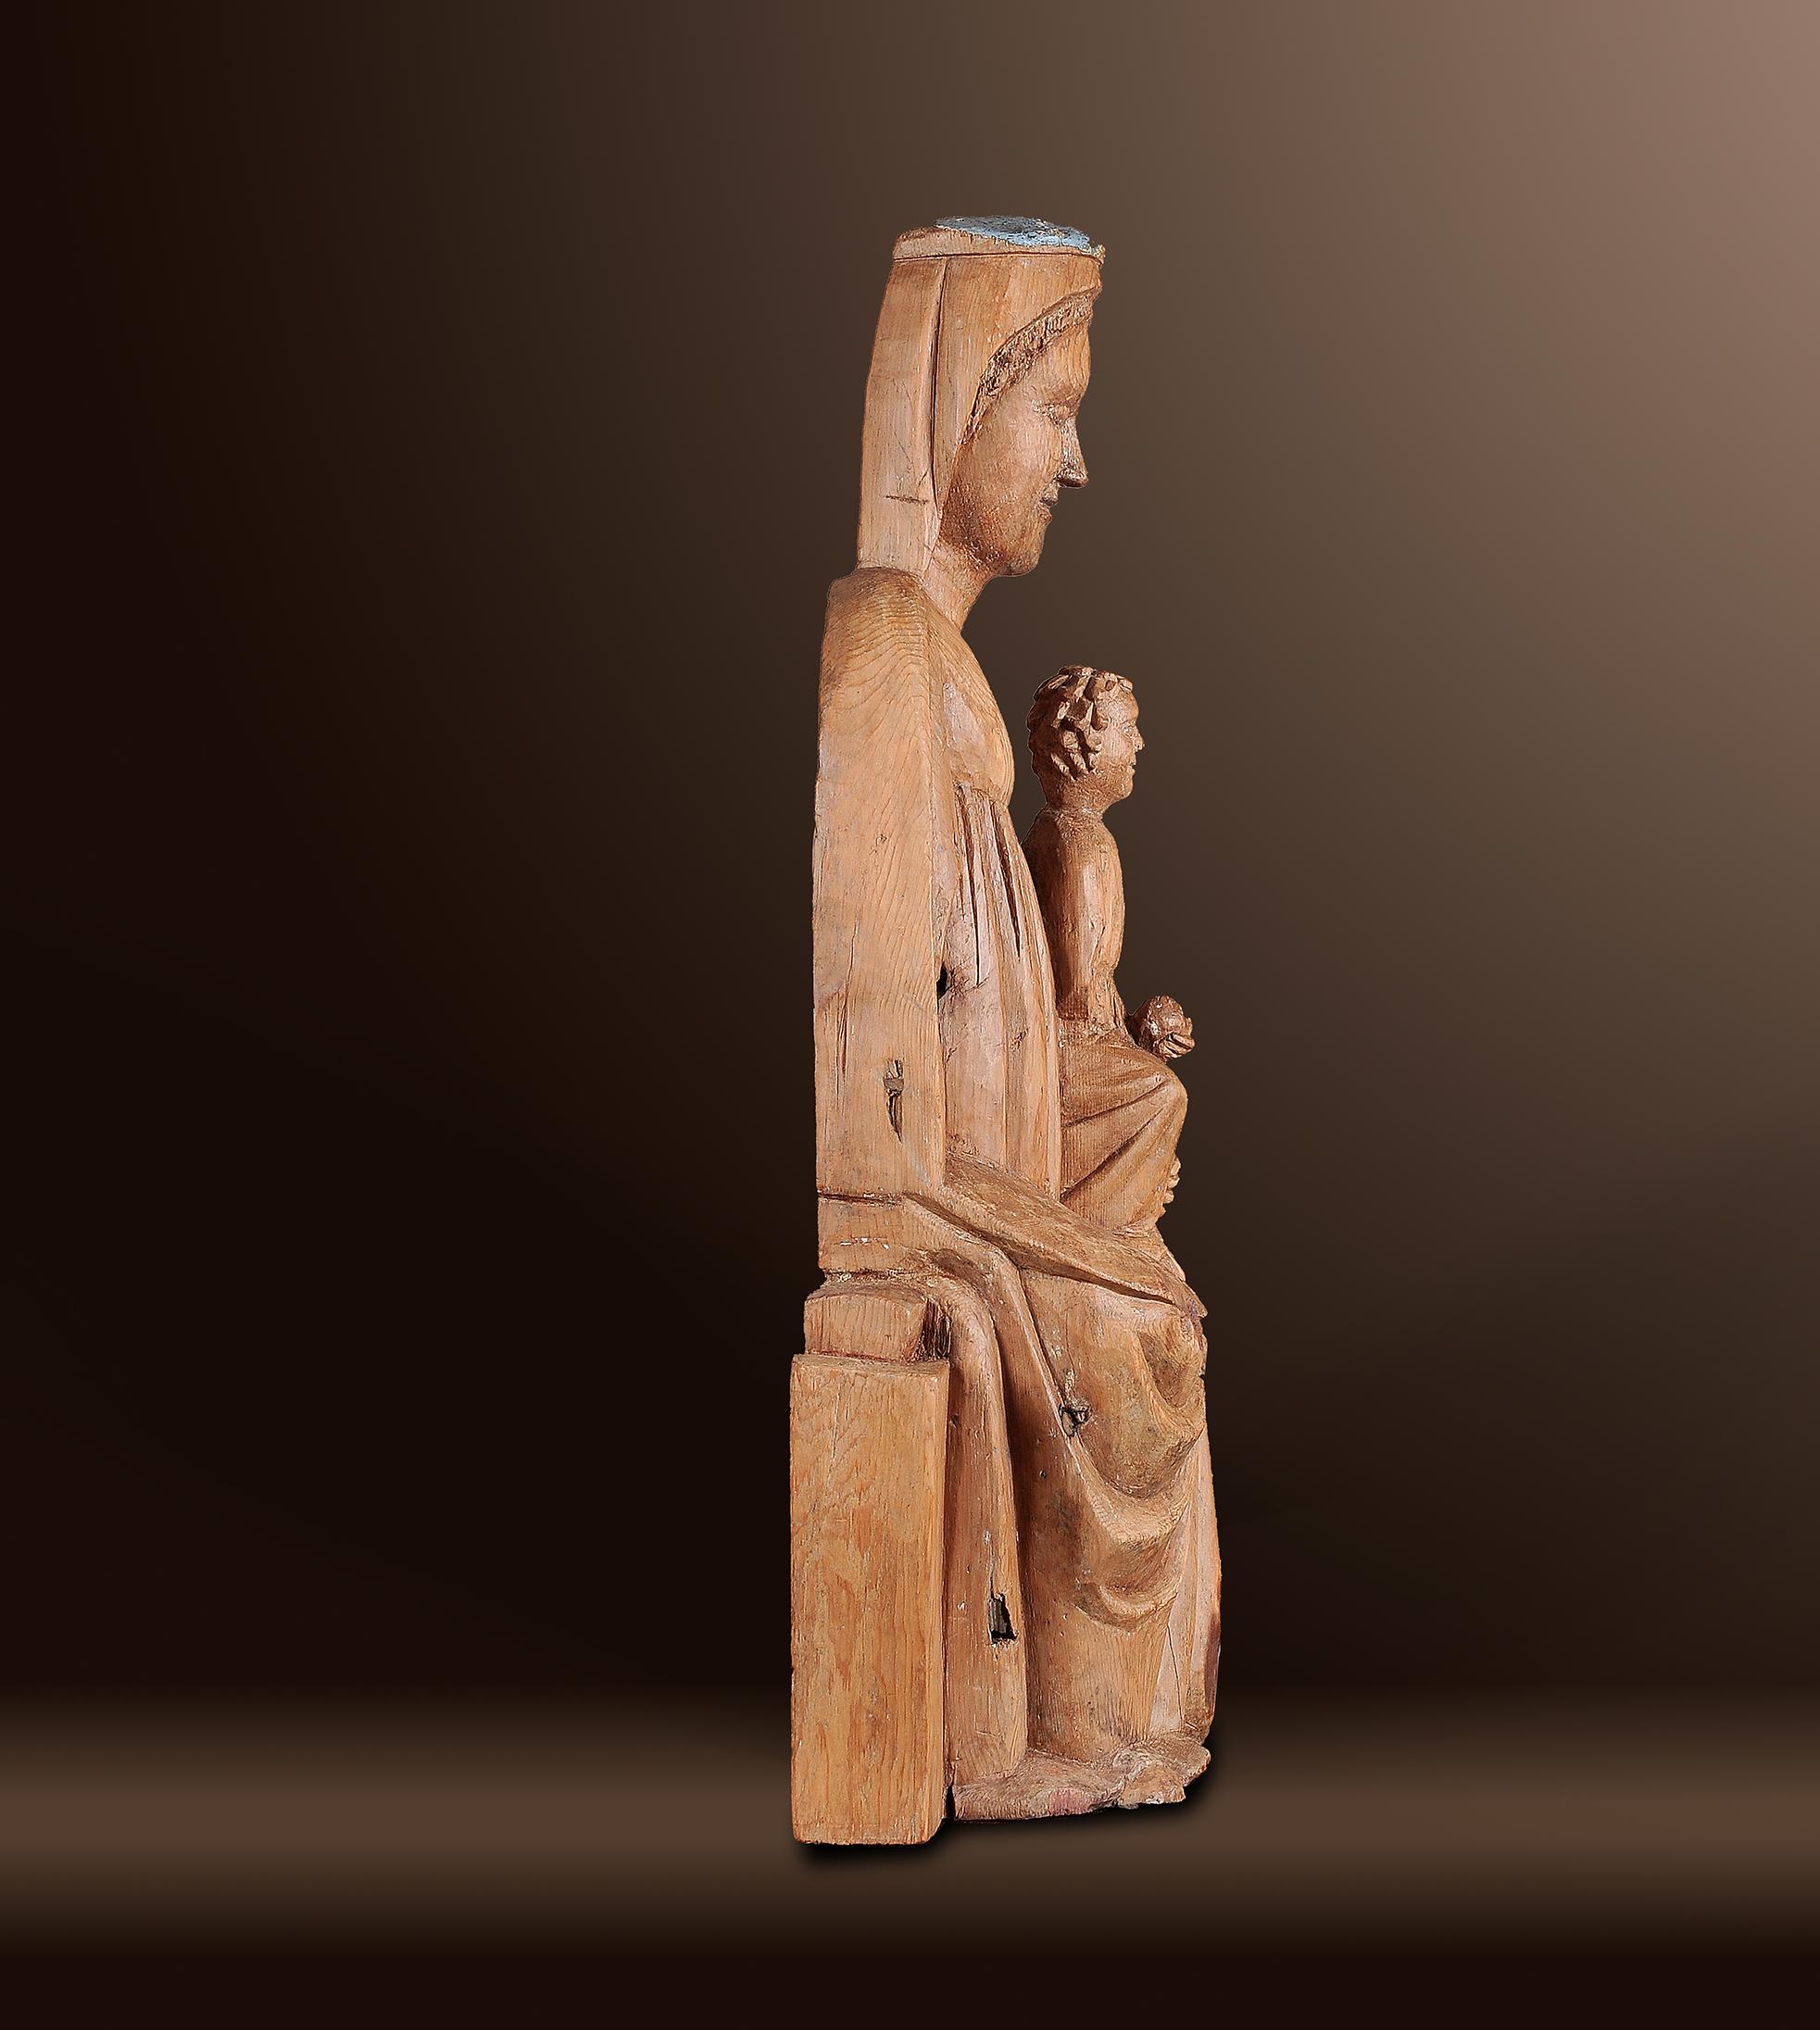 LATE ROMANESQUE MADONNA 
“Sedes Sapientiae”
Switzerland/Wahliss 
Around 1250 
Pine wood/Zirbe? 
Height 65.5 cm 

Provenance: 
Tyrolean private collection 

This seated Madonna of the Sedes Sapientiae (“Seat of Wisdom”) type was carved from pine wood